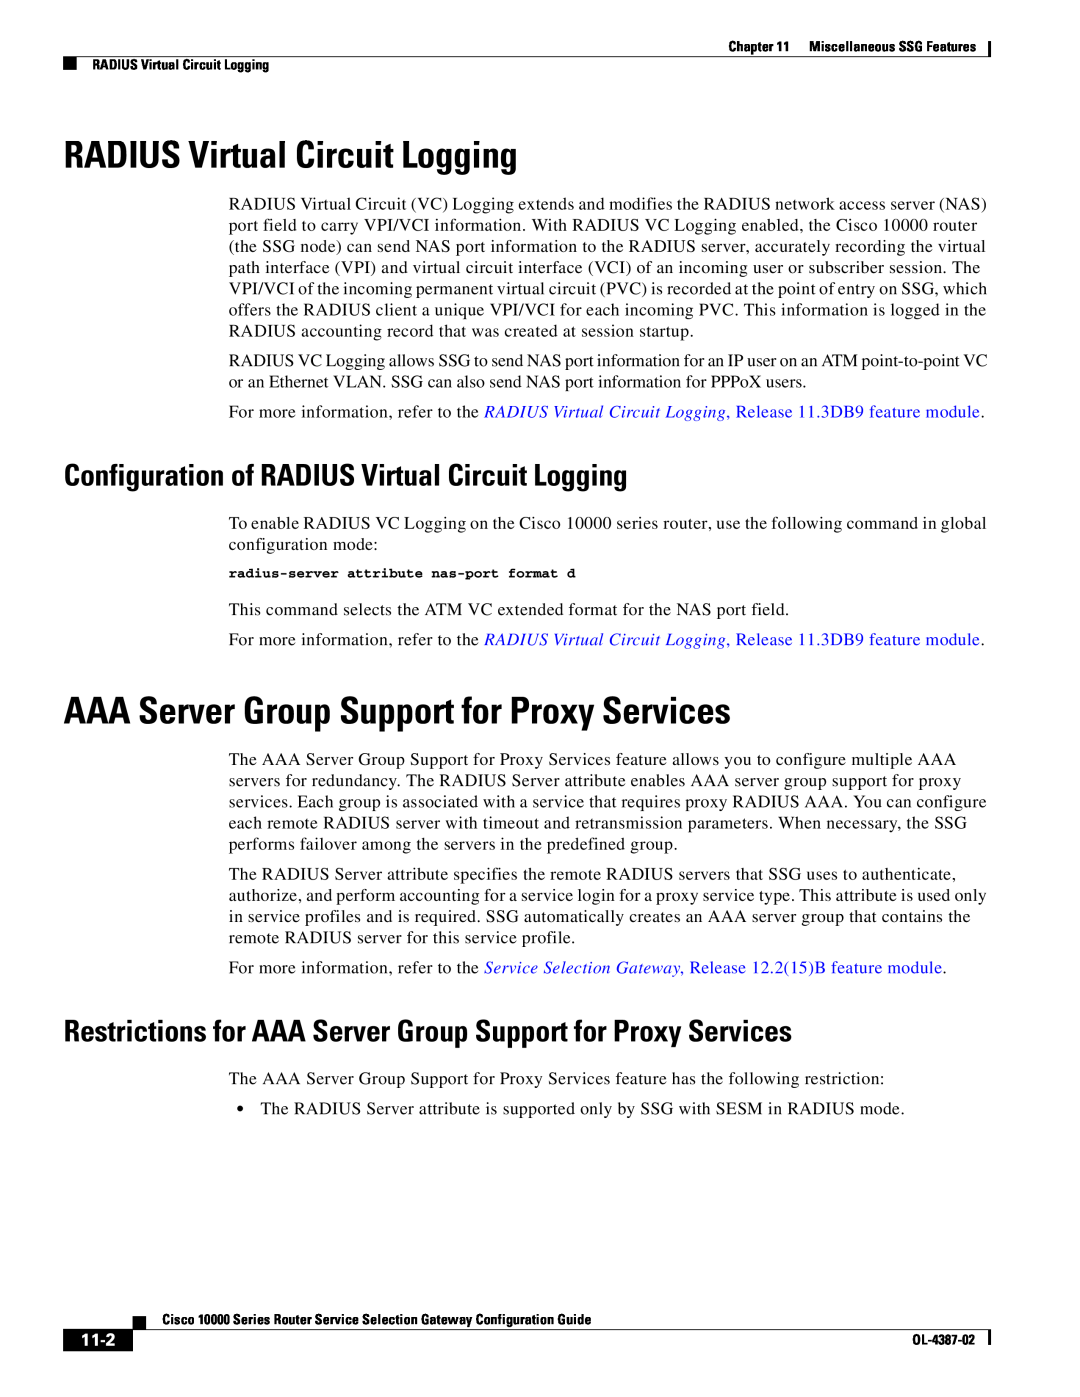 Cisco Systems OL-4387-02 manual RADIUS Virtual Circuit Logging, AAA Server Group Support for Proxy Services, 11-2 